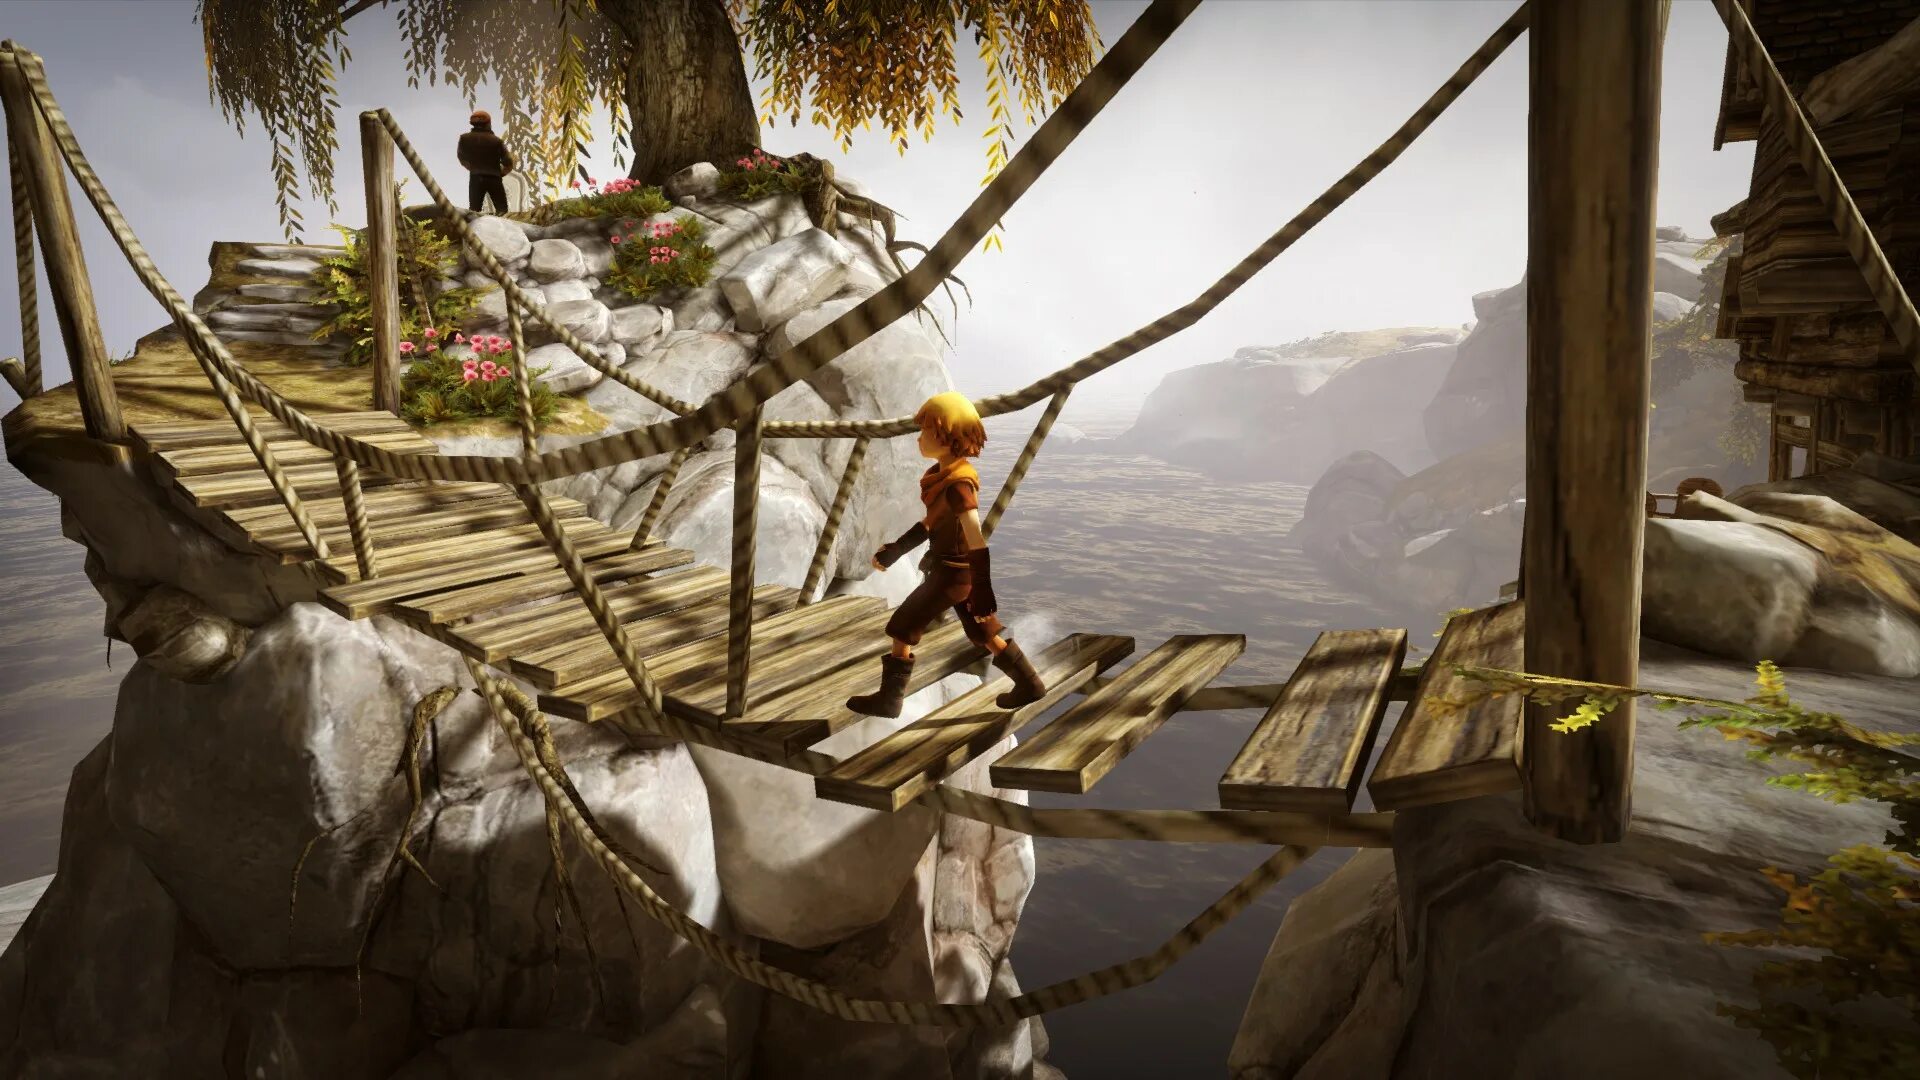 Brother two sons прохождение. Brothers: a Tale of two sons. Brothers: a Tale of two sons (2013). Brothers игра. Two brothers a Tale of two sons.